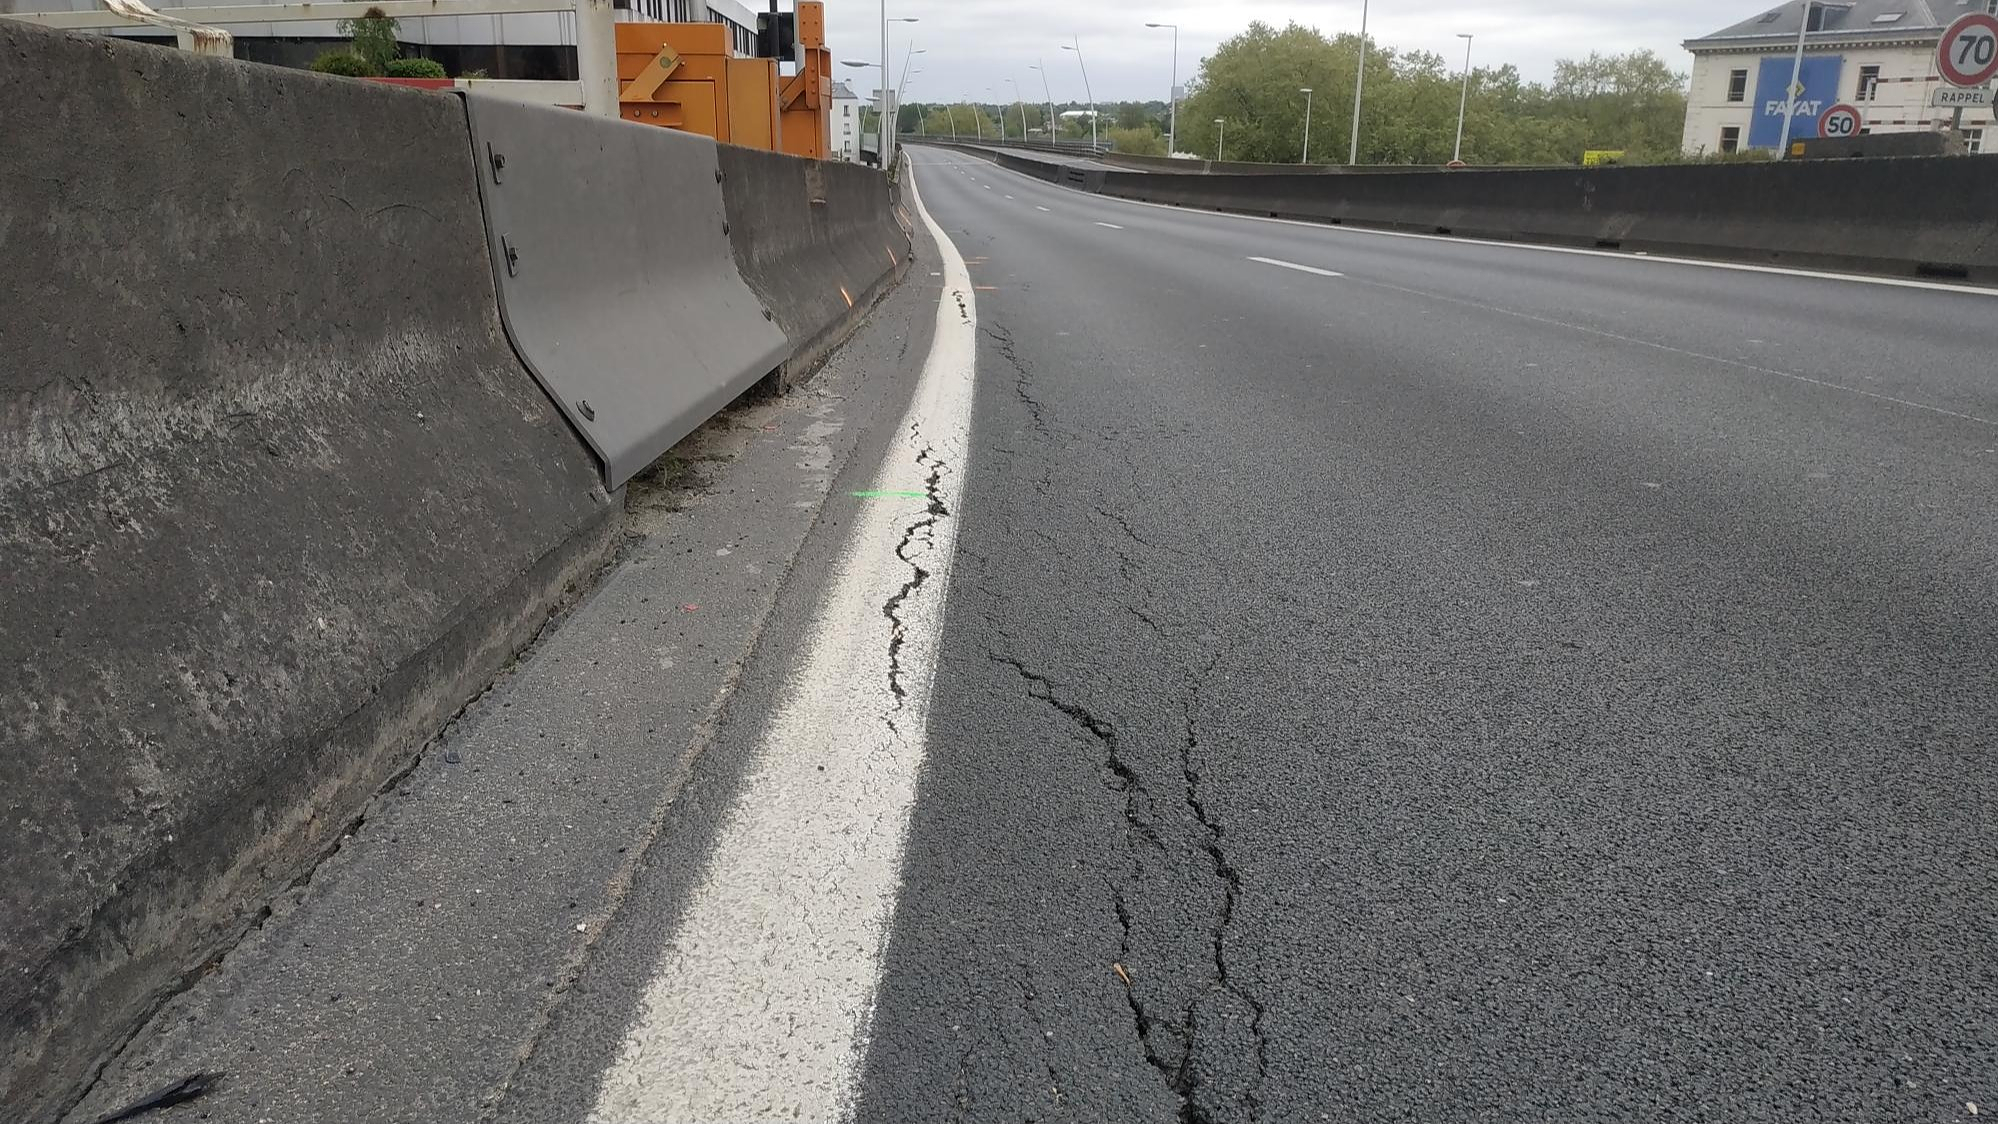 The A13 motorway will not reopen on May 1